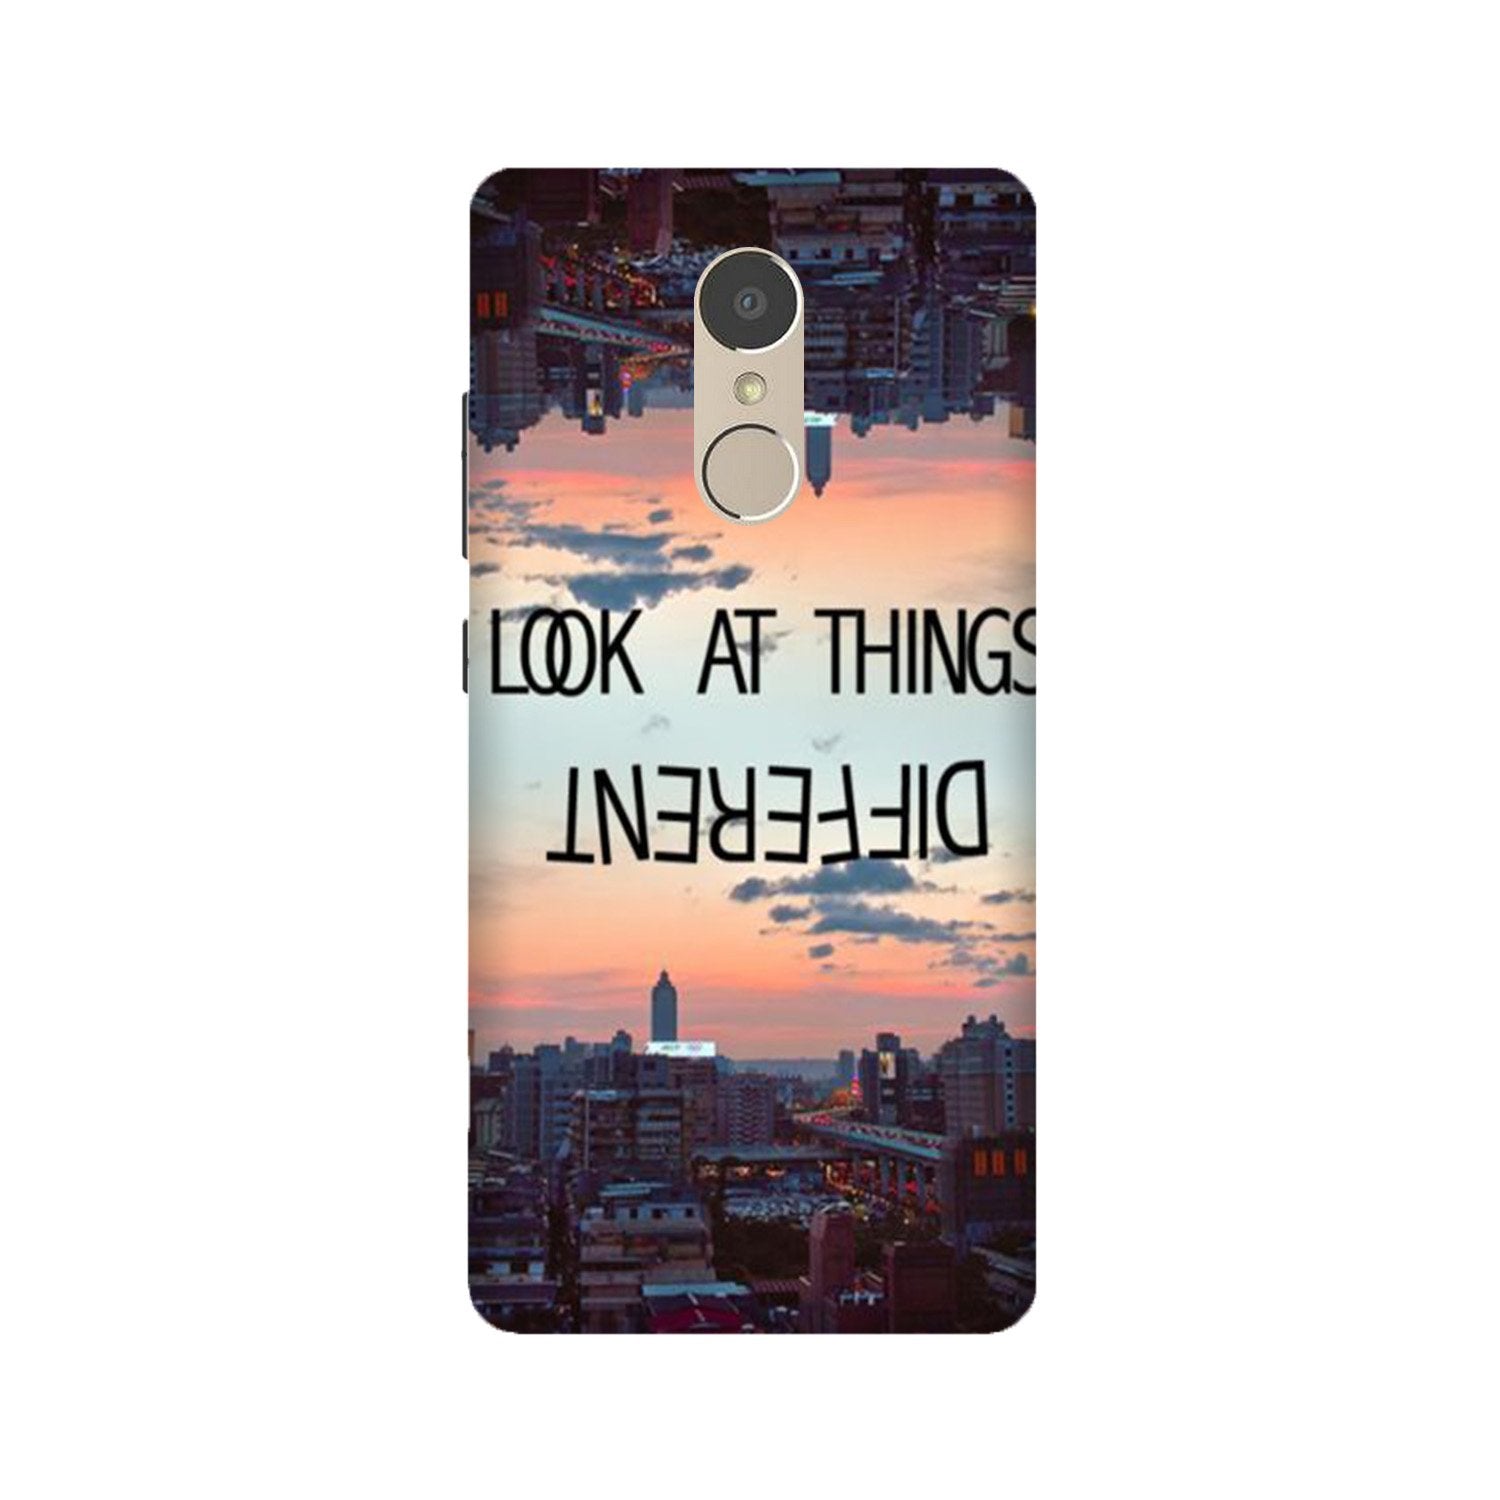 Look at things different Case for Lenovo K6 Note